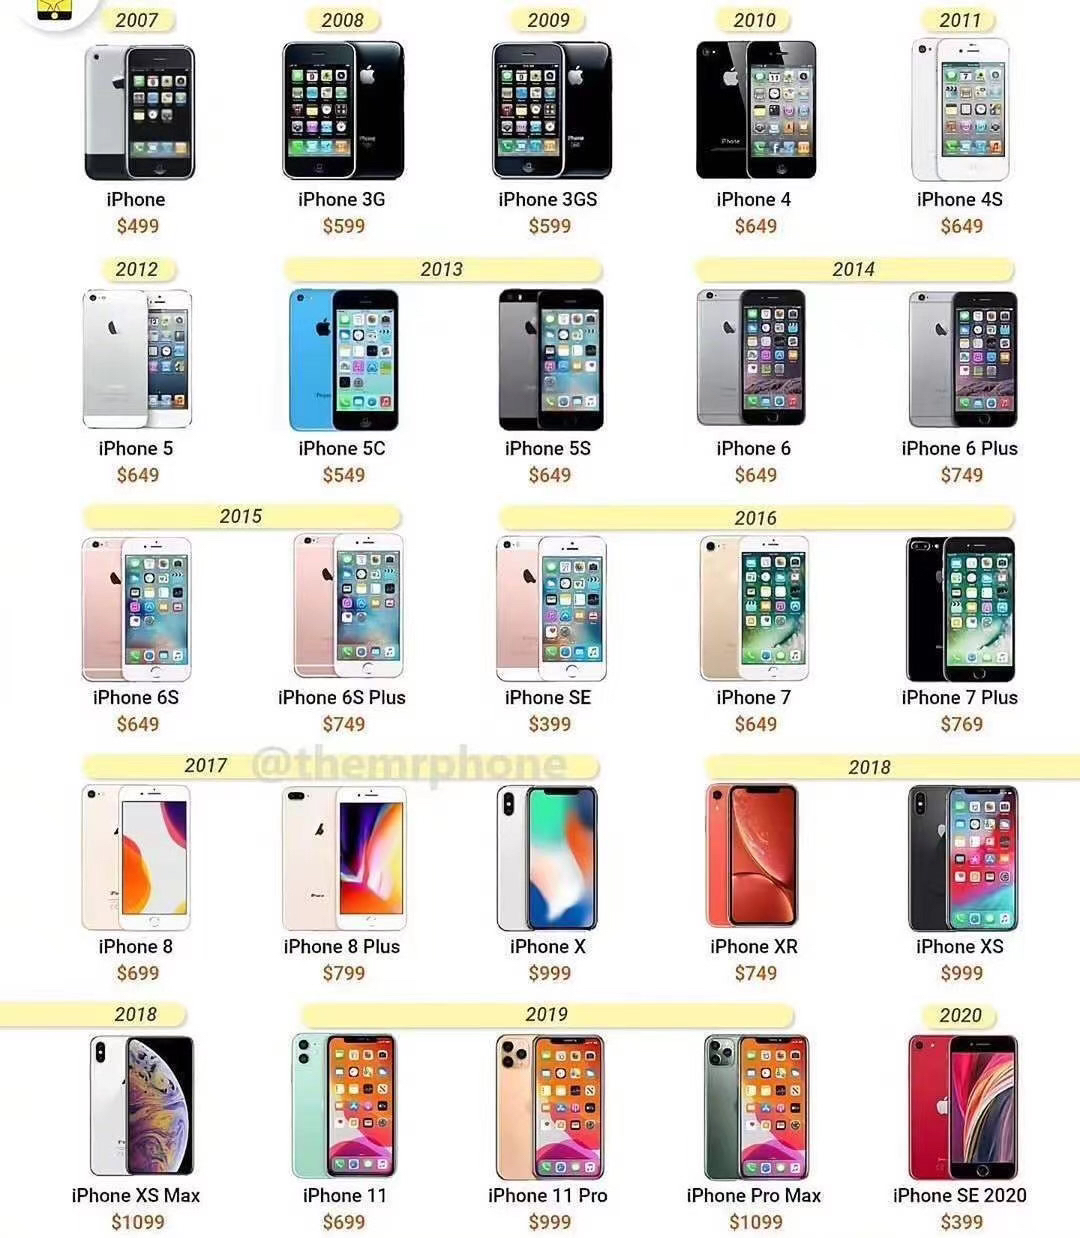 Which Generation Iphones Price Do You Think Is The Most Reasonable